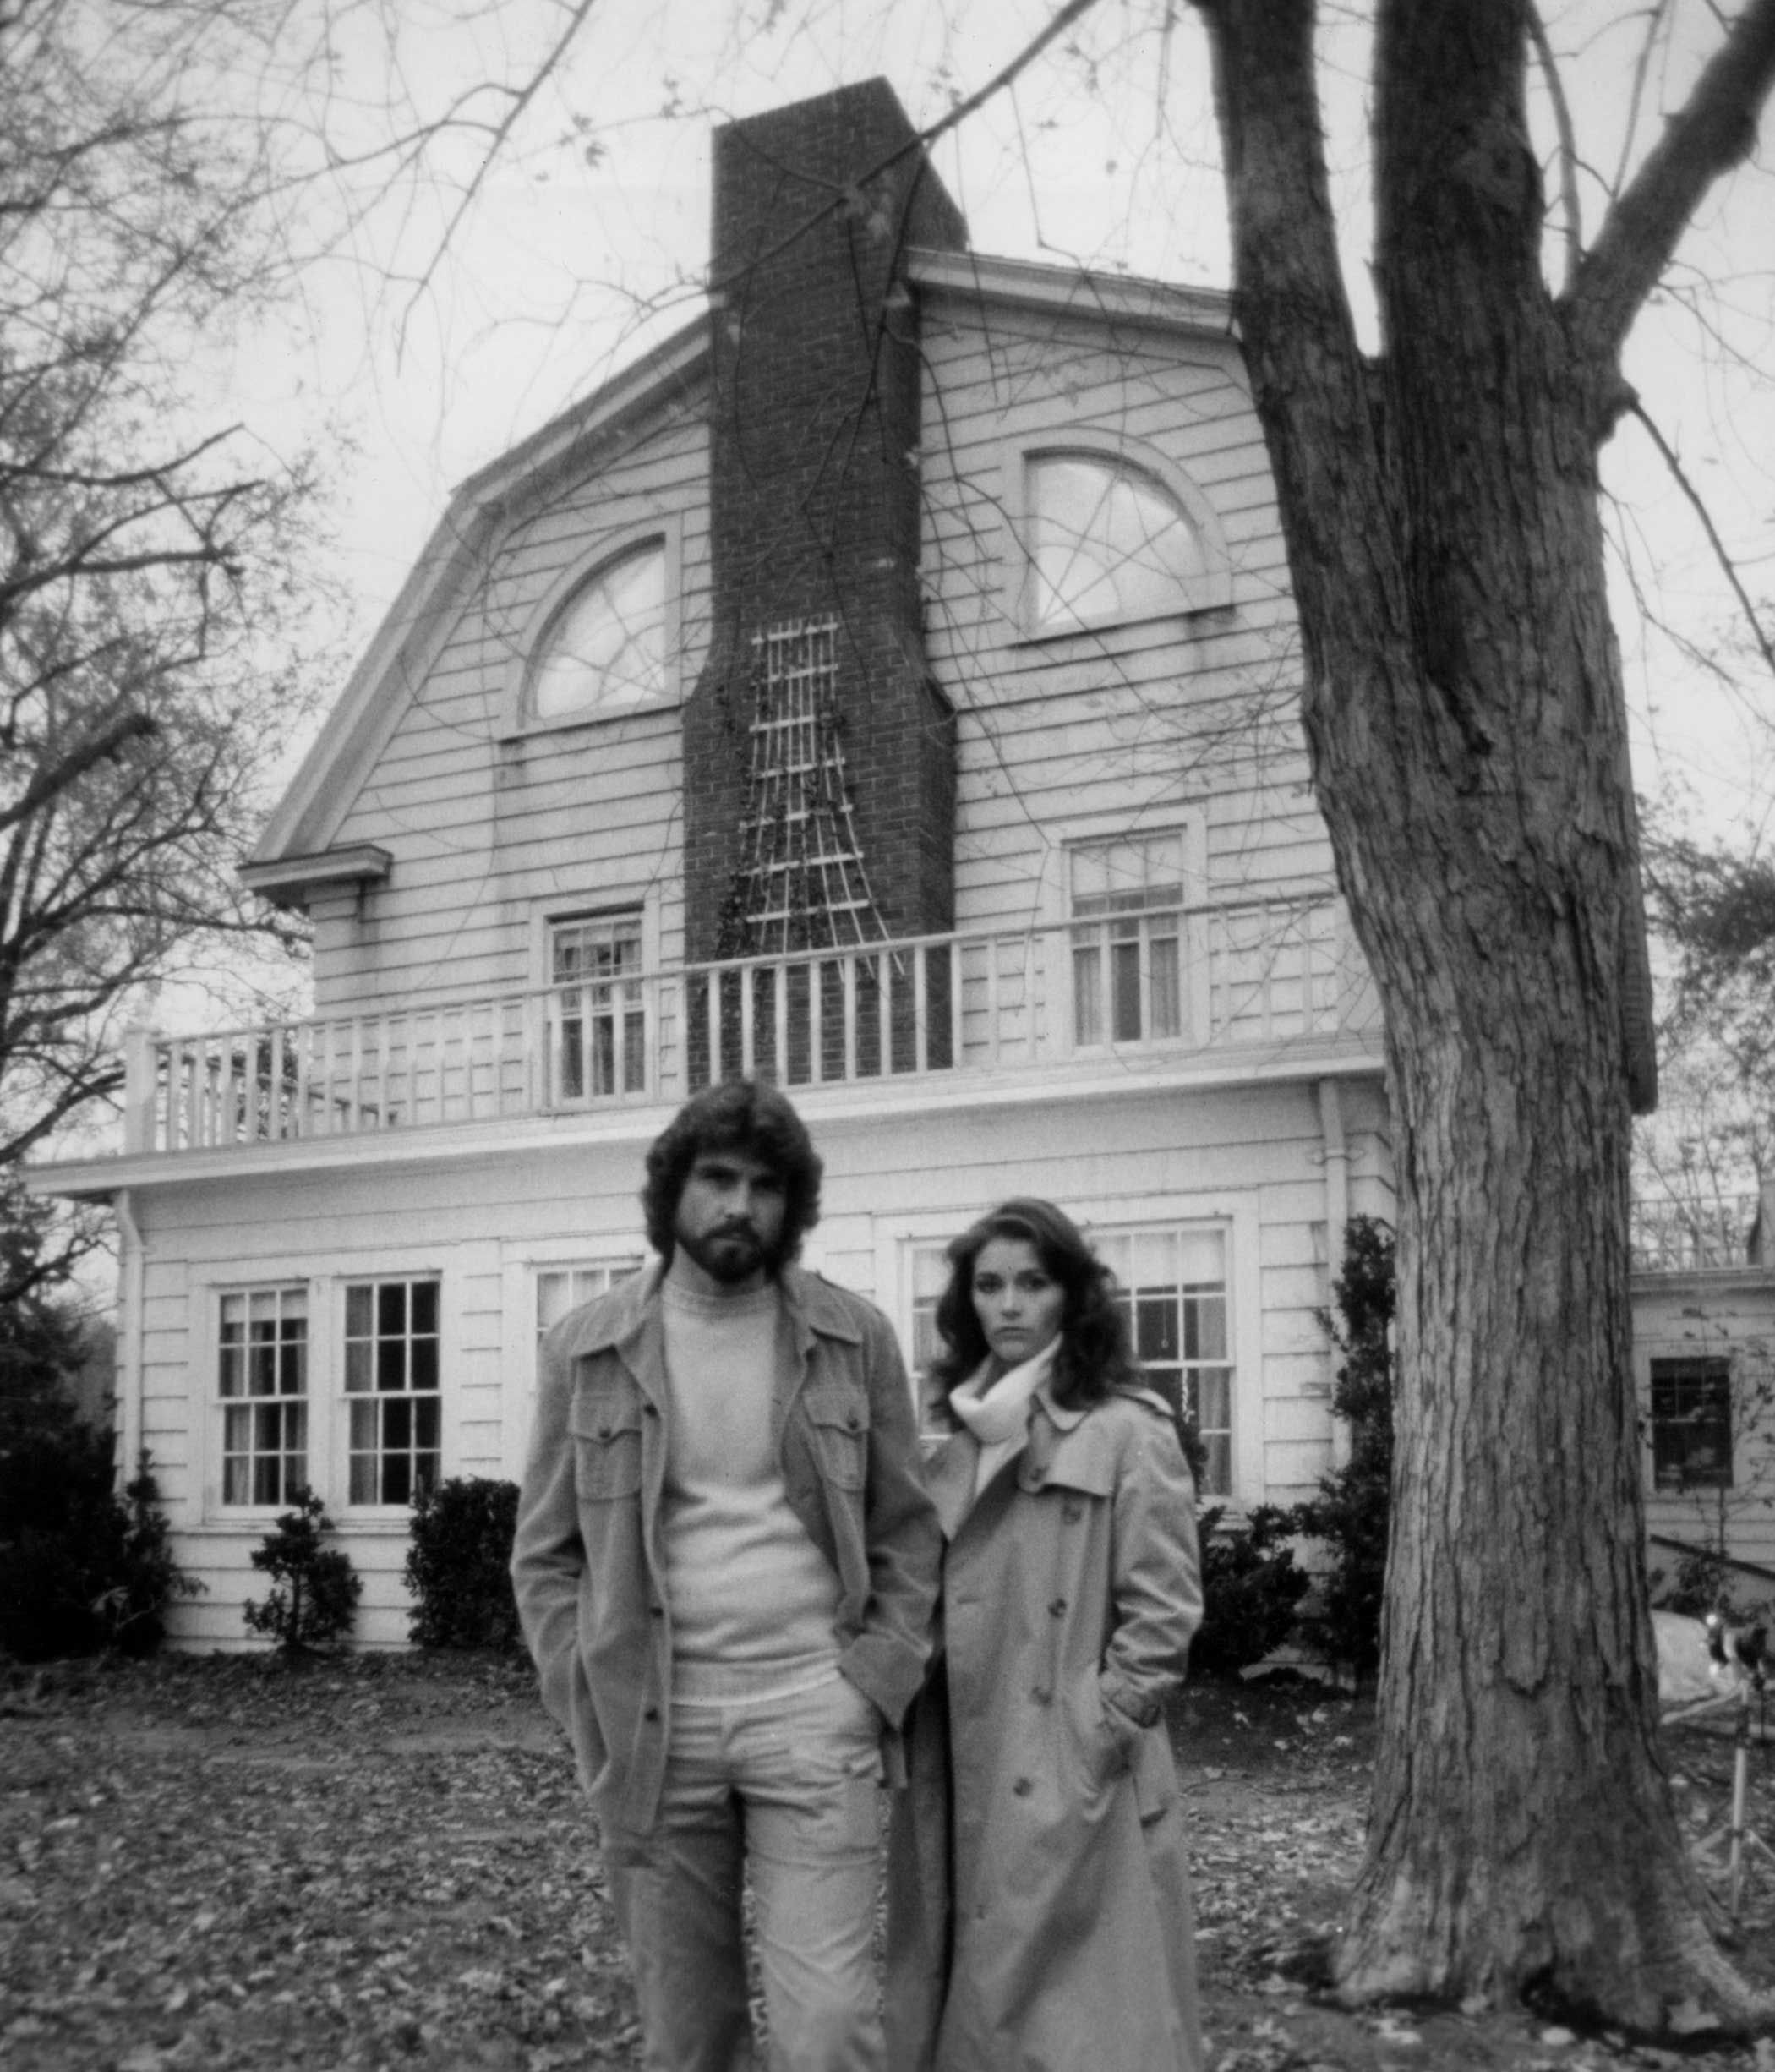 The Amityville Horror, 1979 The film is based on the alleged paranormal encounters that George and Kathy Lutz experienced after moving into their three-story colonial home in Amityville, N.Y. in 1975. The year before, the house had been the site of a terrible mass murder, when 23-year-old Ronnie DeFeo killed both his parents and four siblings.